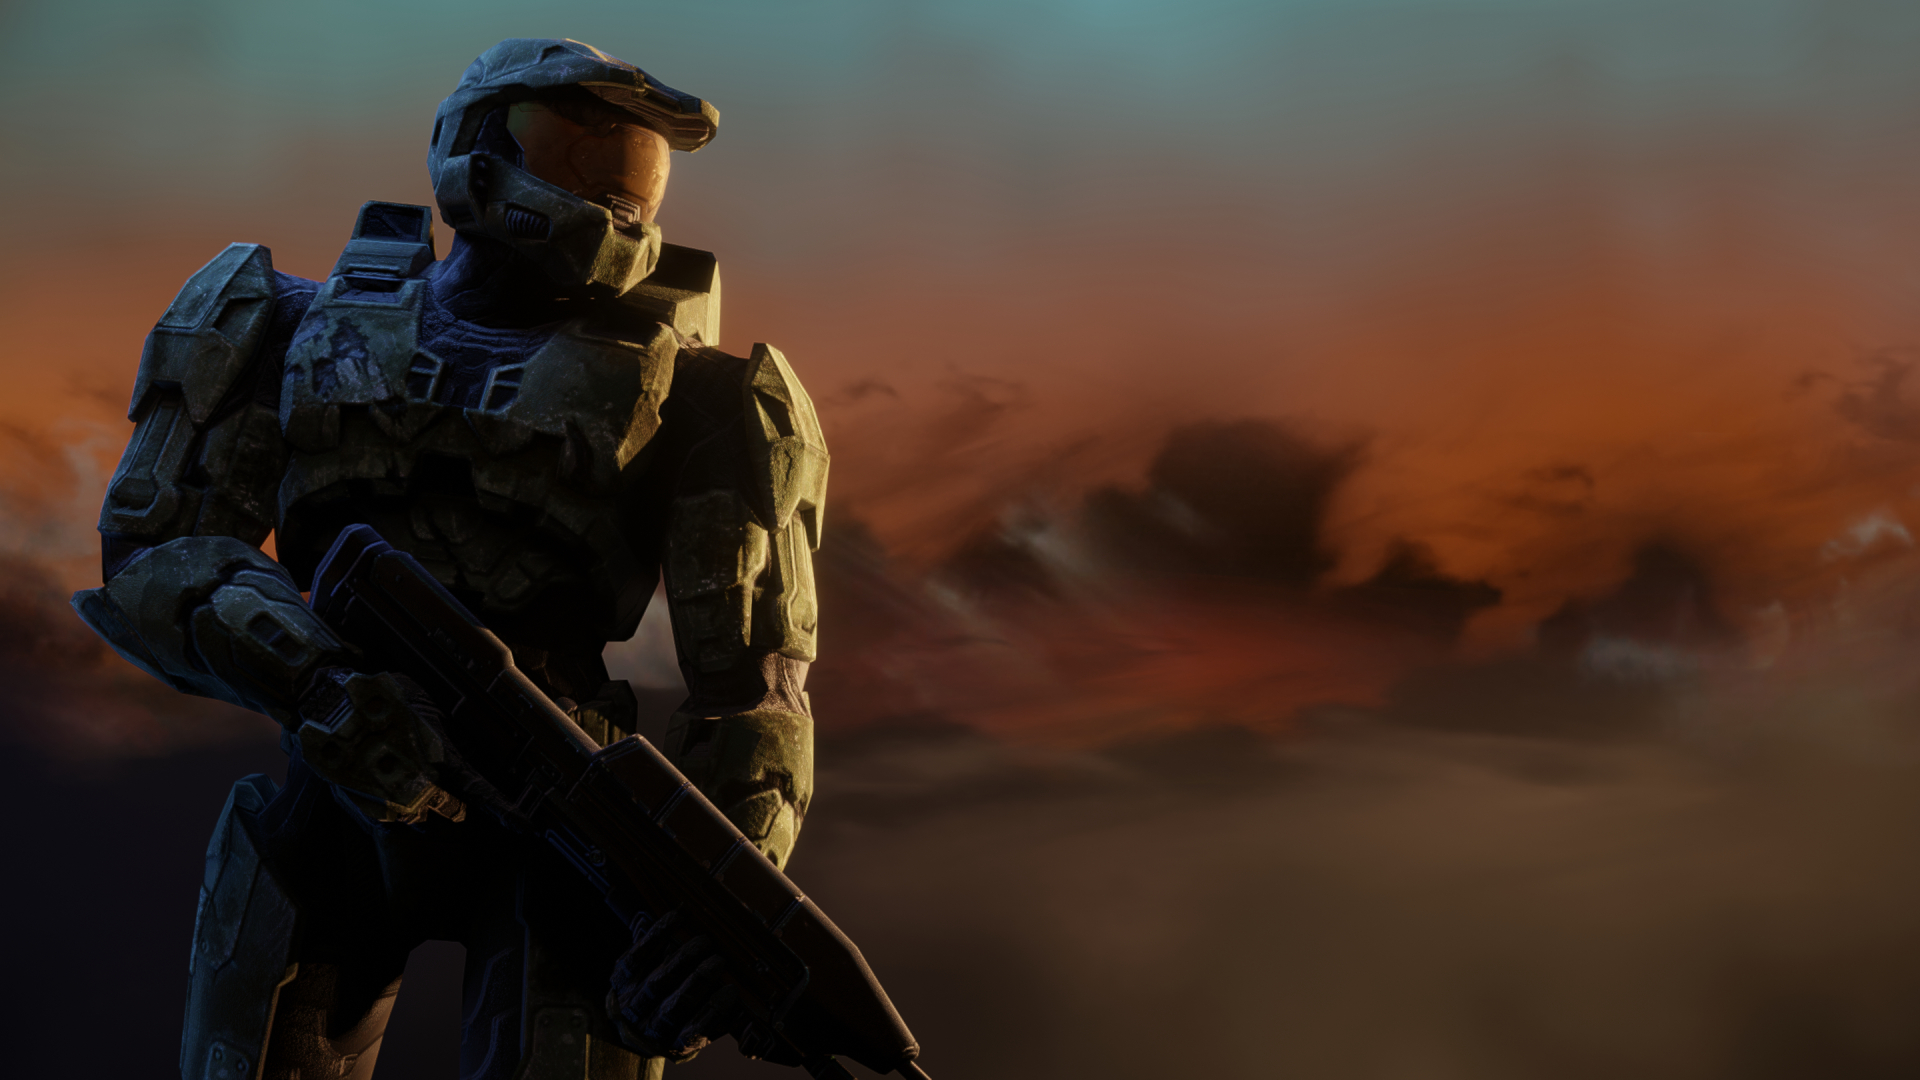 Update more than 71 halo hd wallpaper latest - in.coedo.com.vn